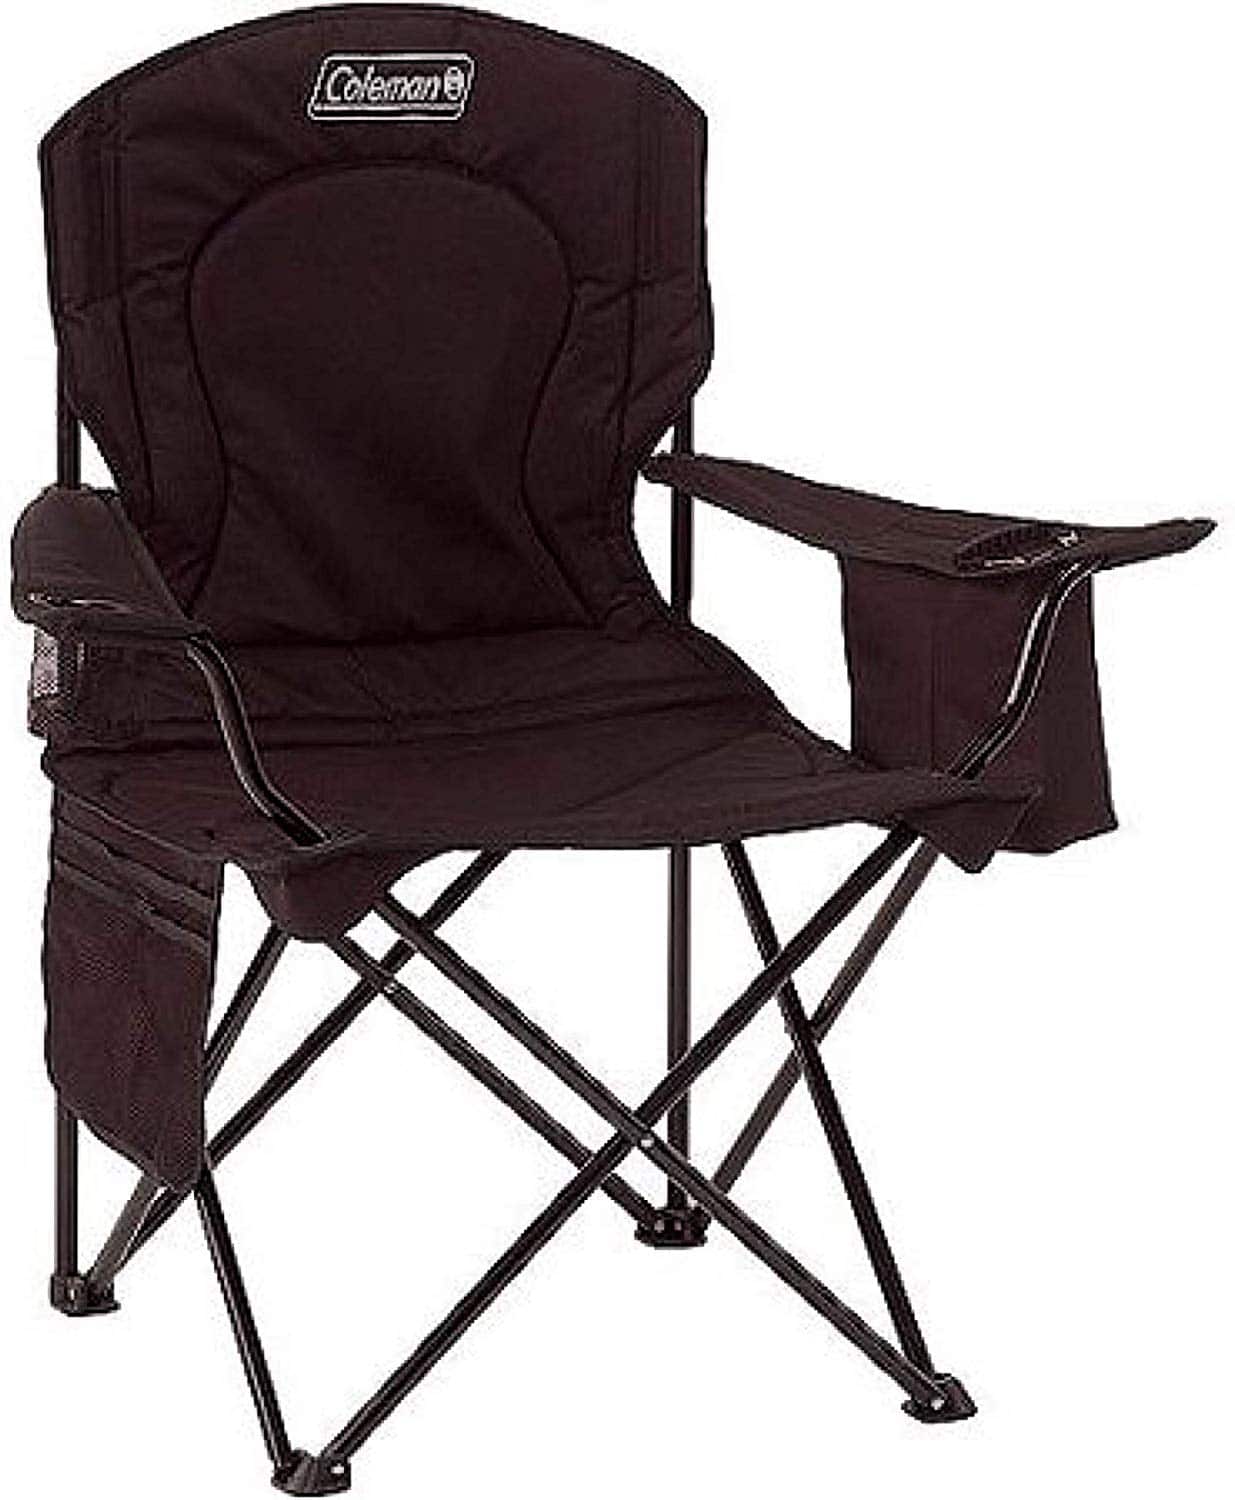 Coleman Portable Camping Quad Chair With 4 Can Cooler 